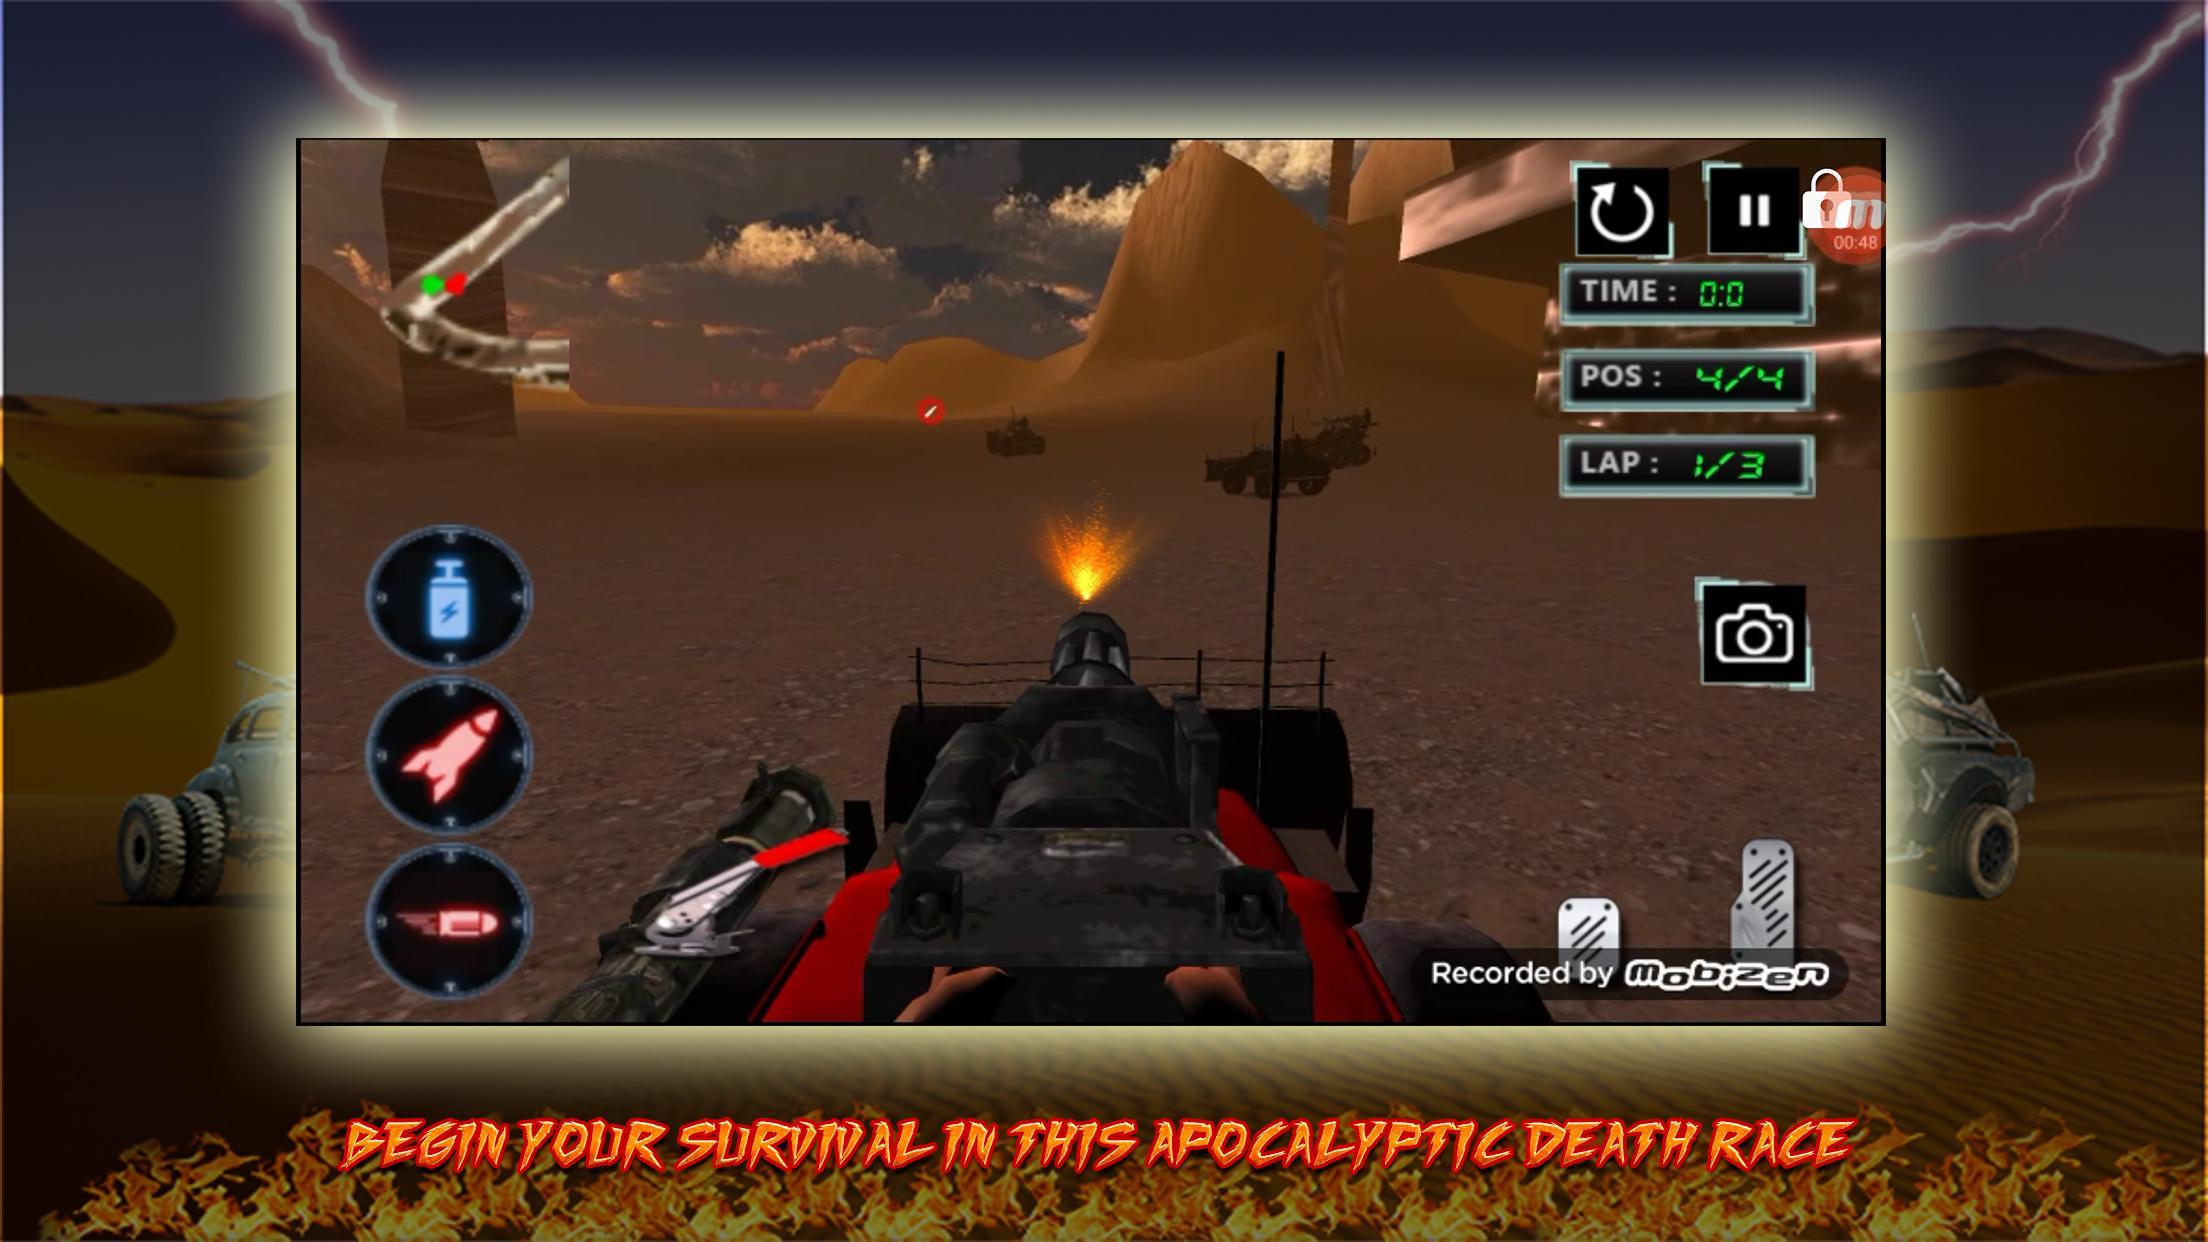 Death Race Road To Apocalypse For Android Apk Download - apoc 2 roblox related keywords suggestions apoc 2 roblox